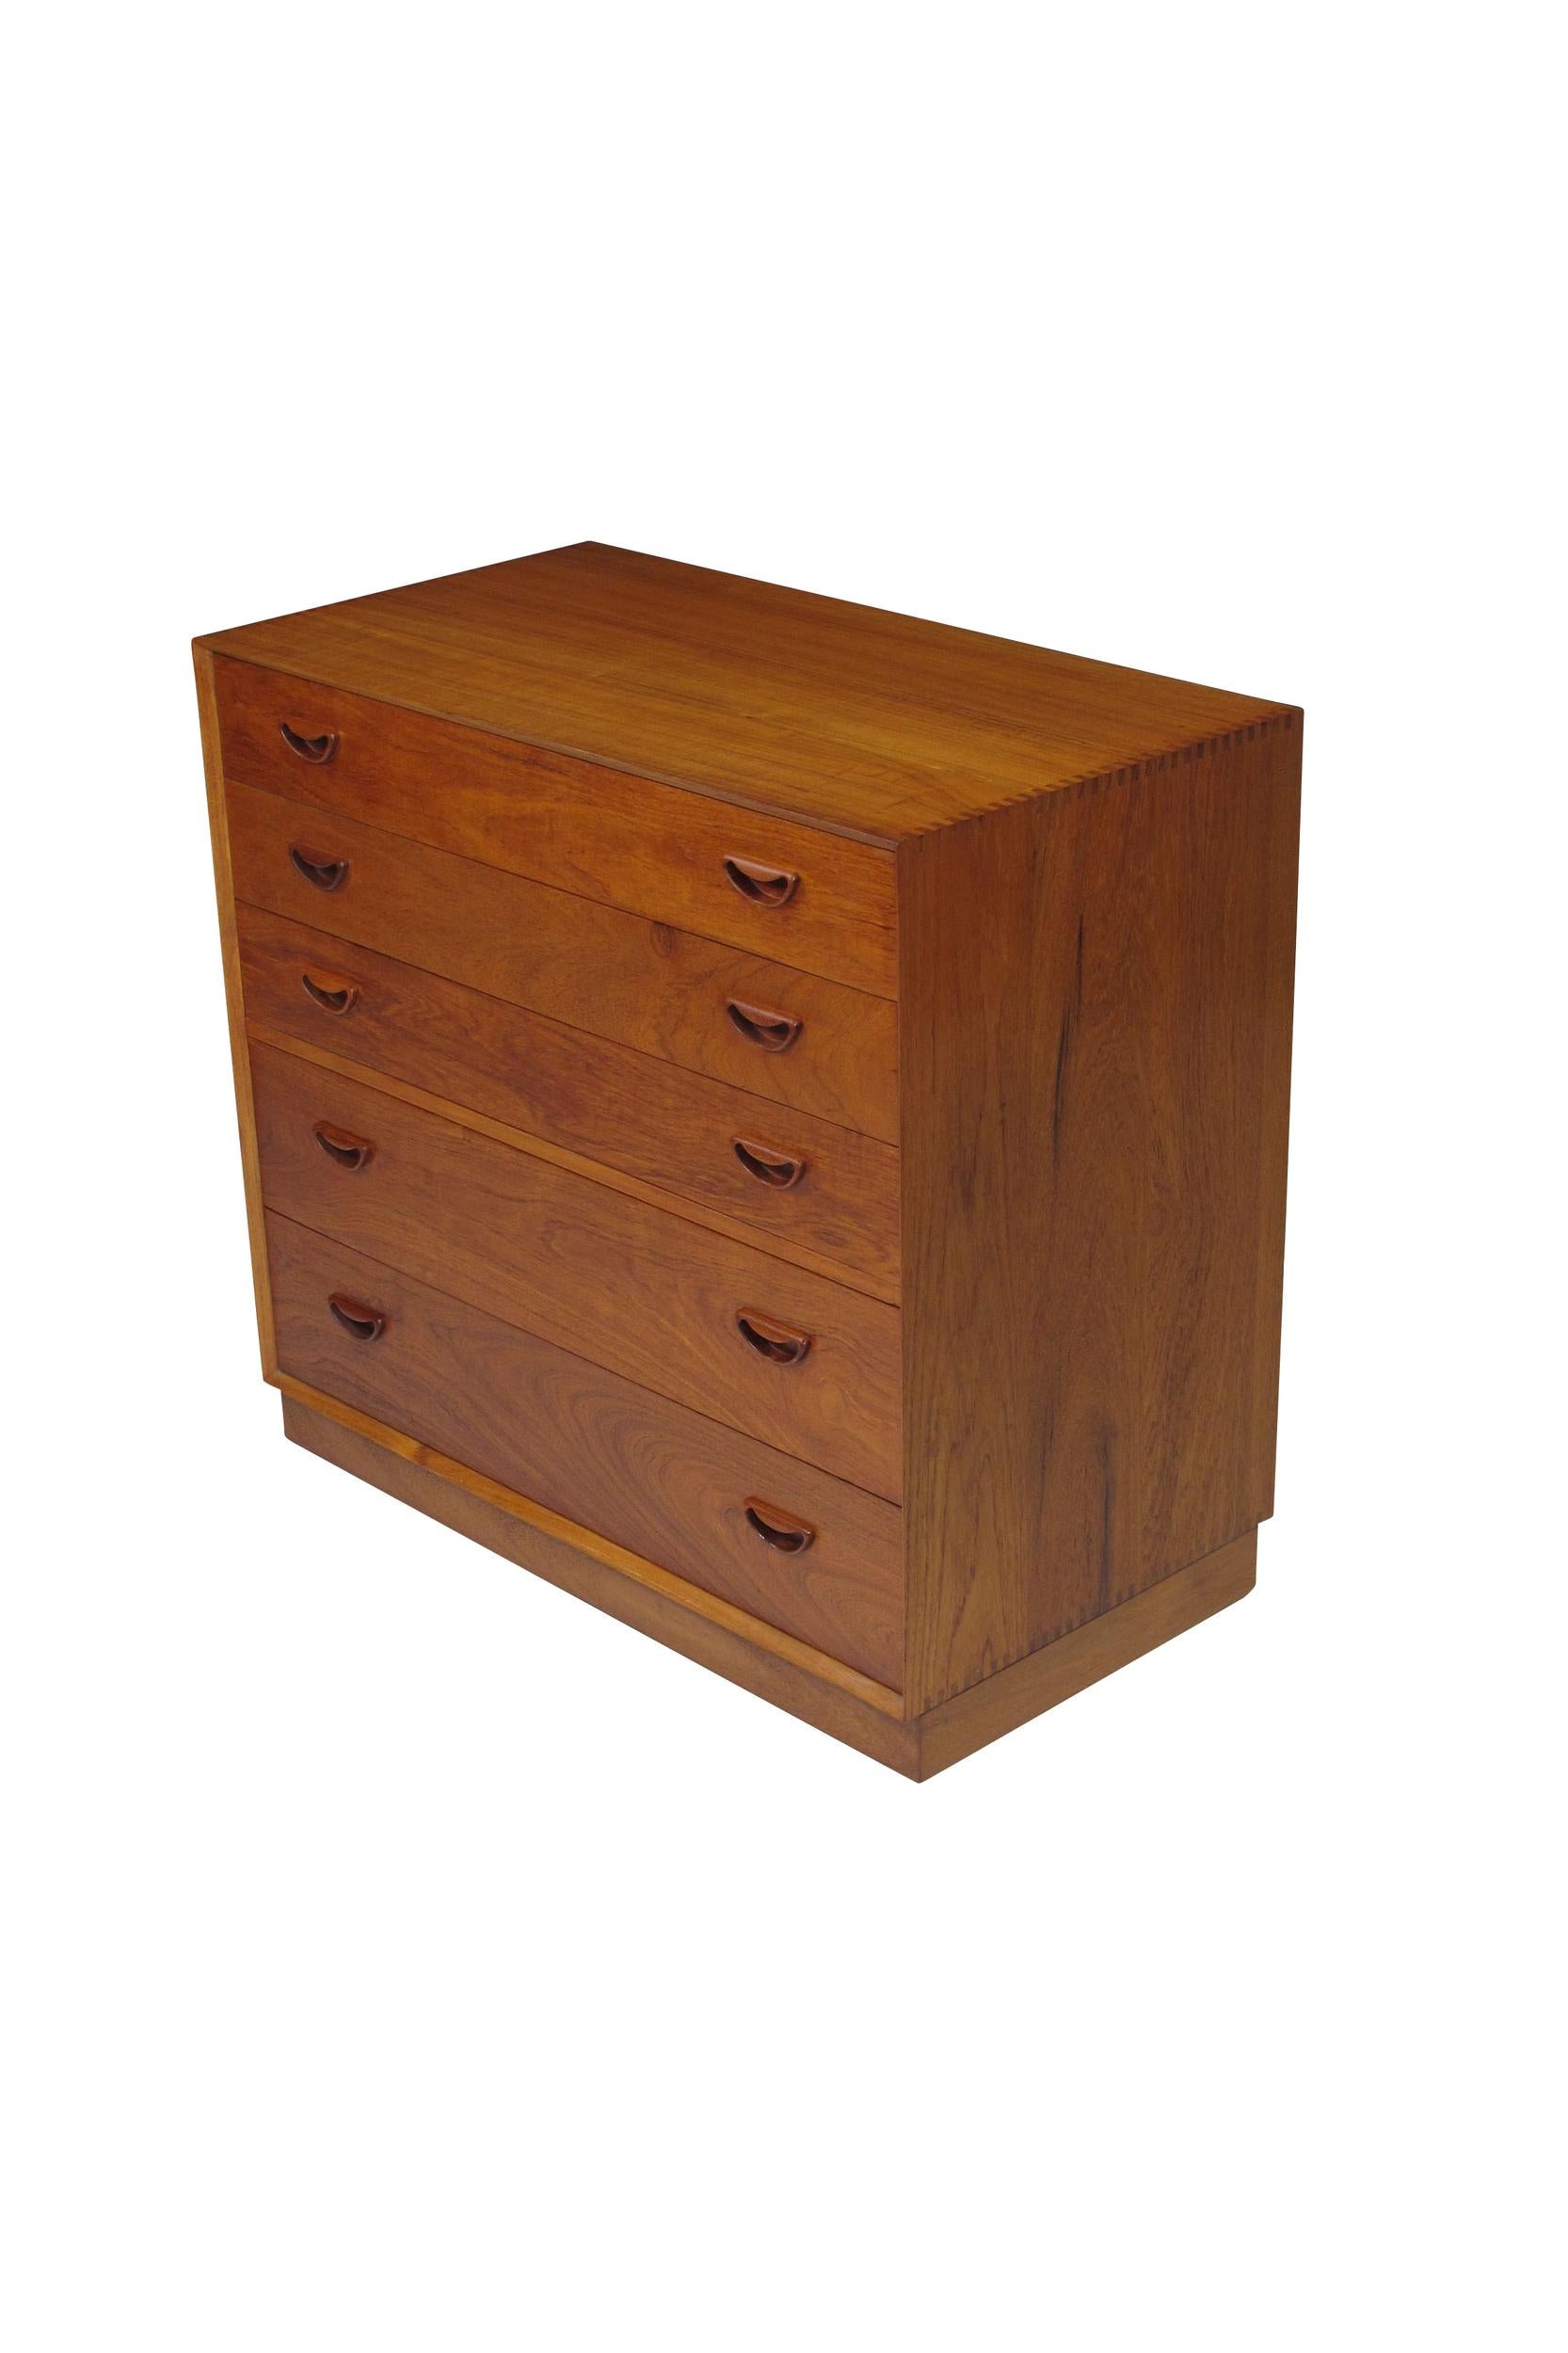 Six-drawer dresser designed by Peter Hvidt & Orla Molgaard Nielsen for Soborg Mobelfabrik Model 301, Denmark. Crafted of solid teak with exposed joinery and sculpted pulls, raised on plinth base. Professionally restored and in excellent condition